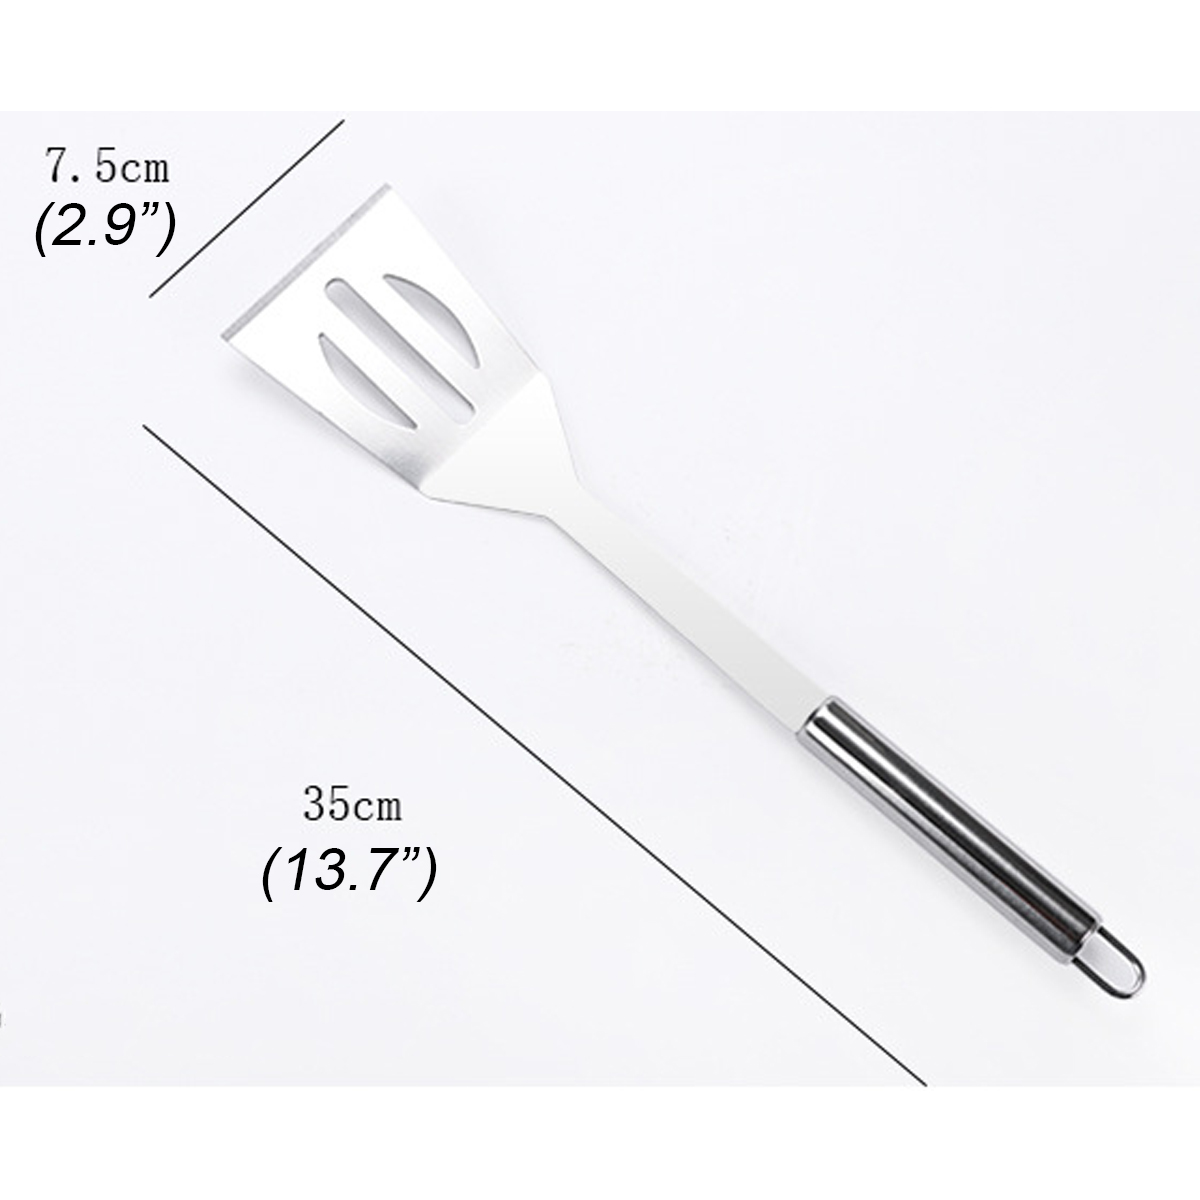 Stainless-Steel-BBQ-Tools-Set-Barbecue-Grilling-Utensil-Accessories-Camping-Outdoor-Cooking-1676473-11